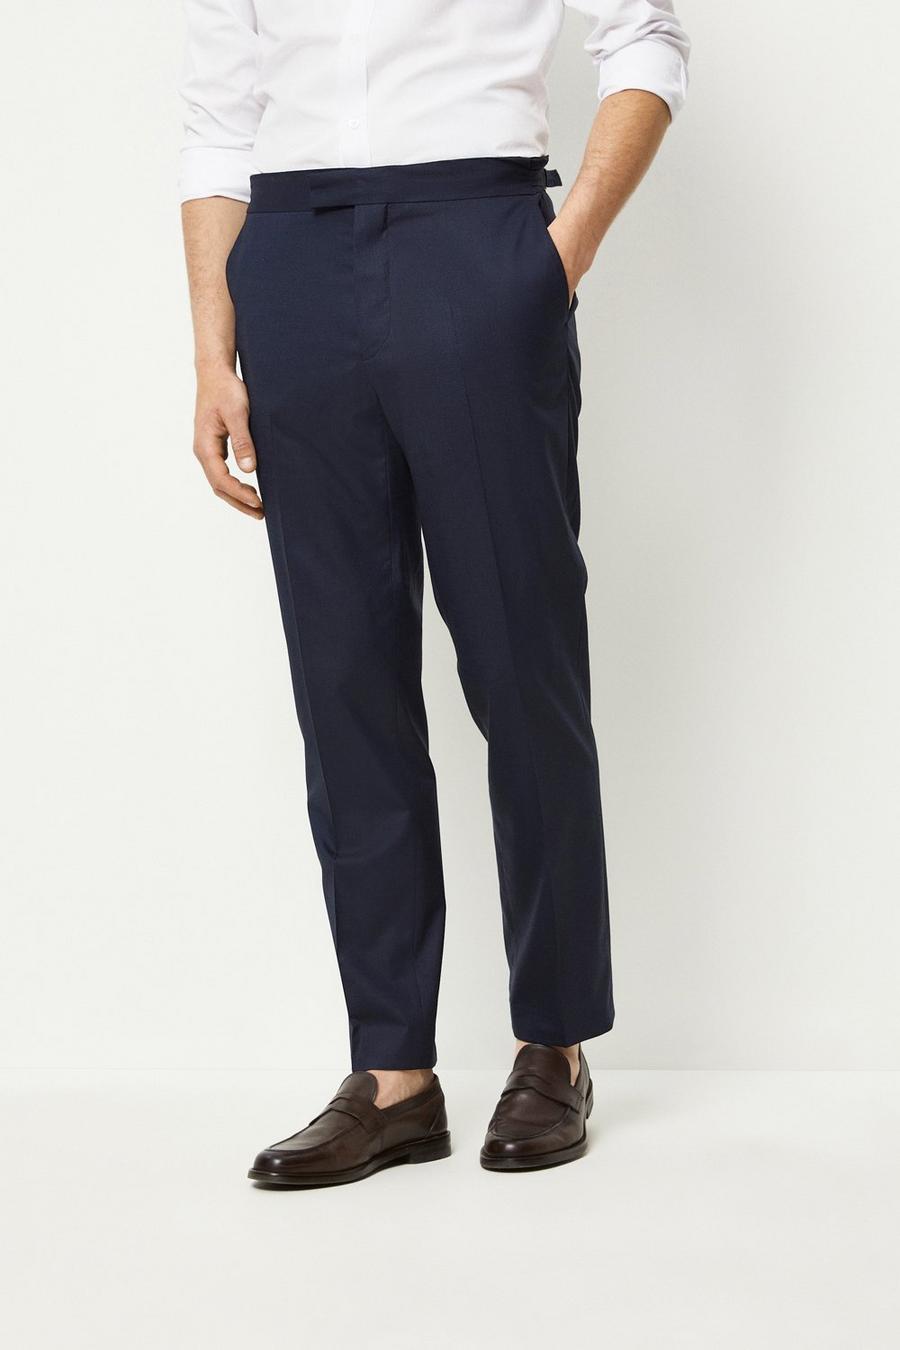 1904 Tailored Fit Navy Suit Trousers